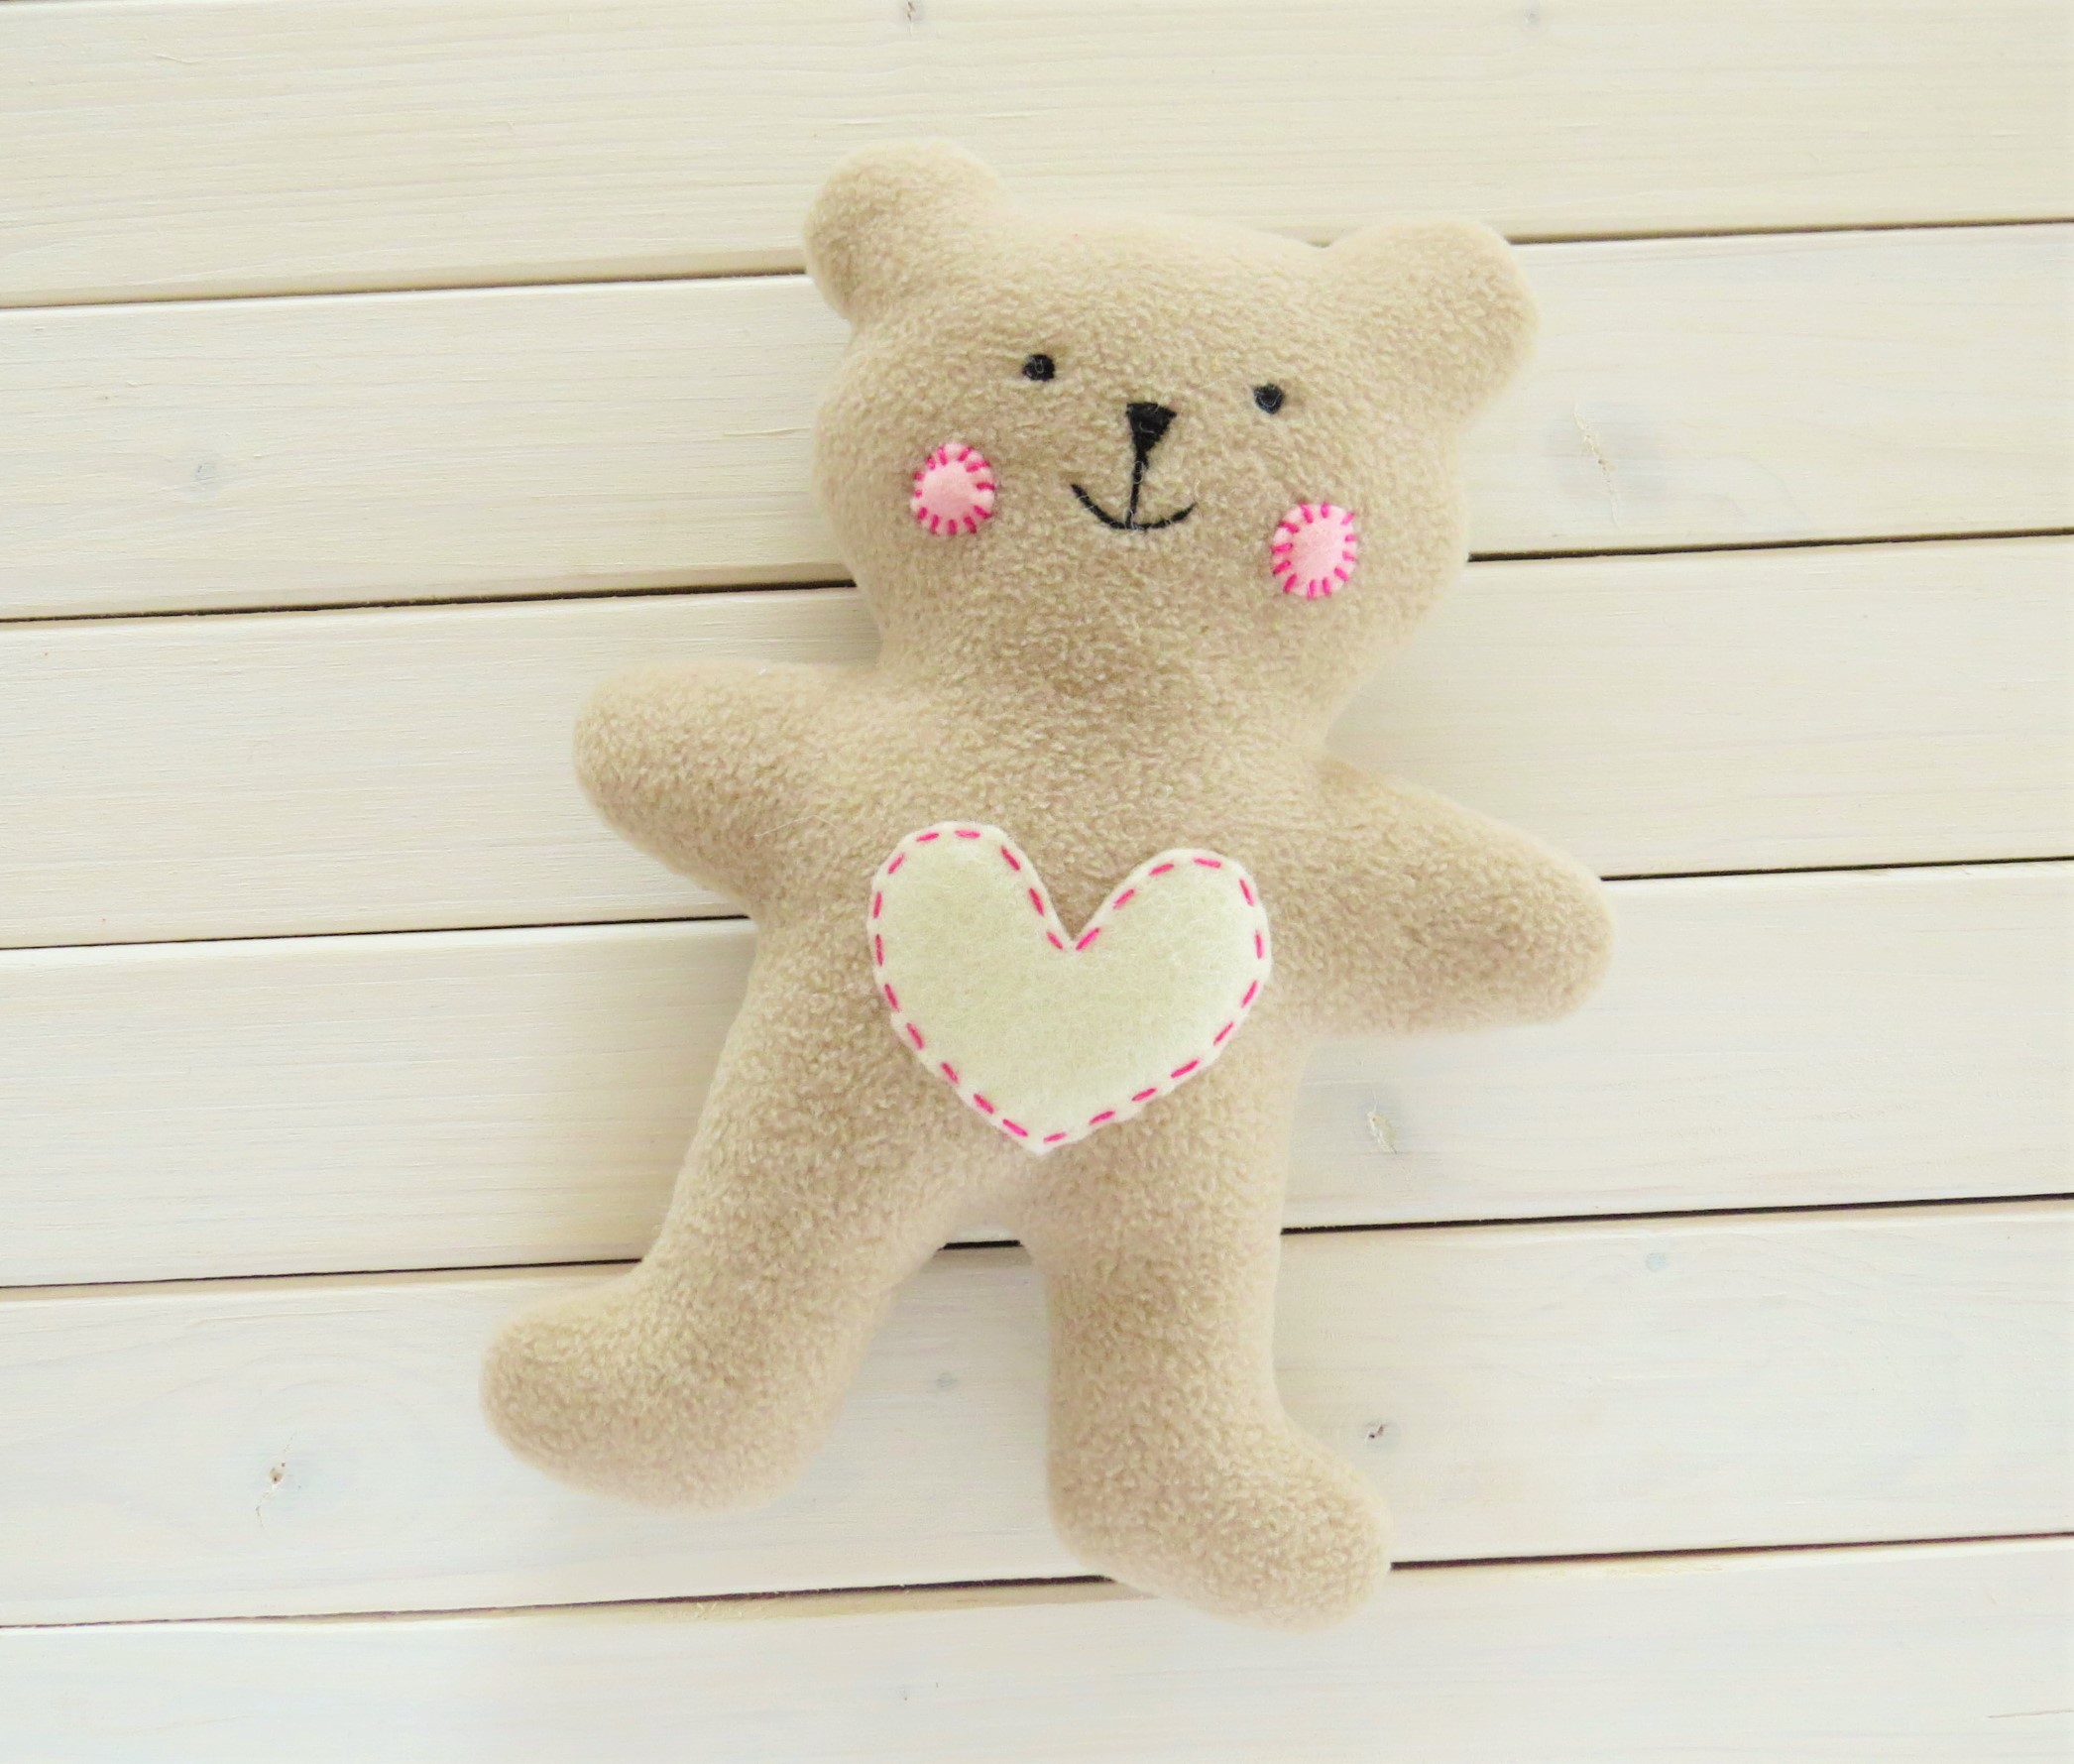 how-to-sew-quickly-a-cute-little-soft-baby-teddy-bear-sew-toy